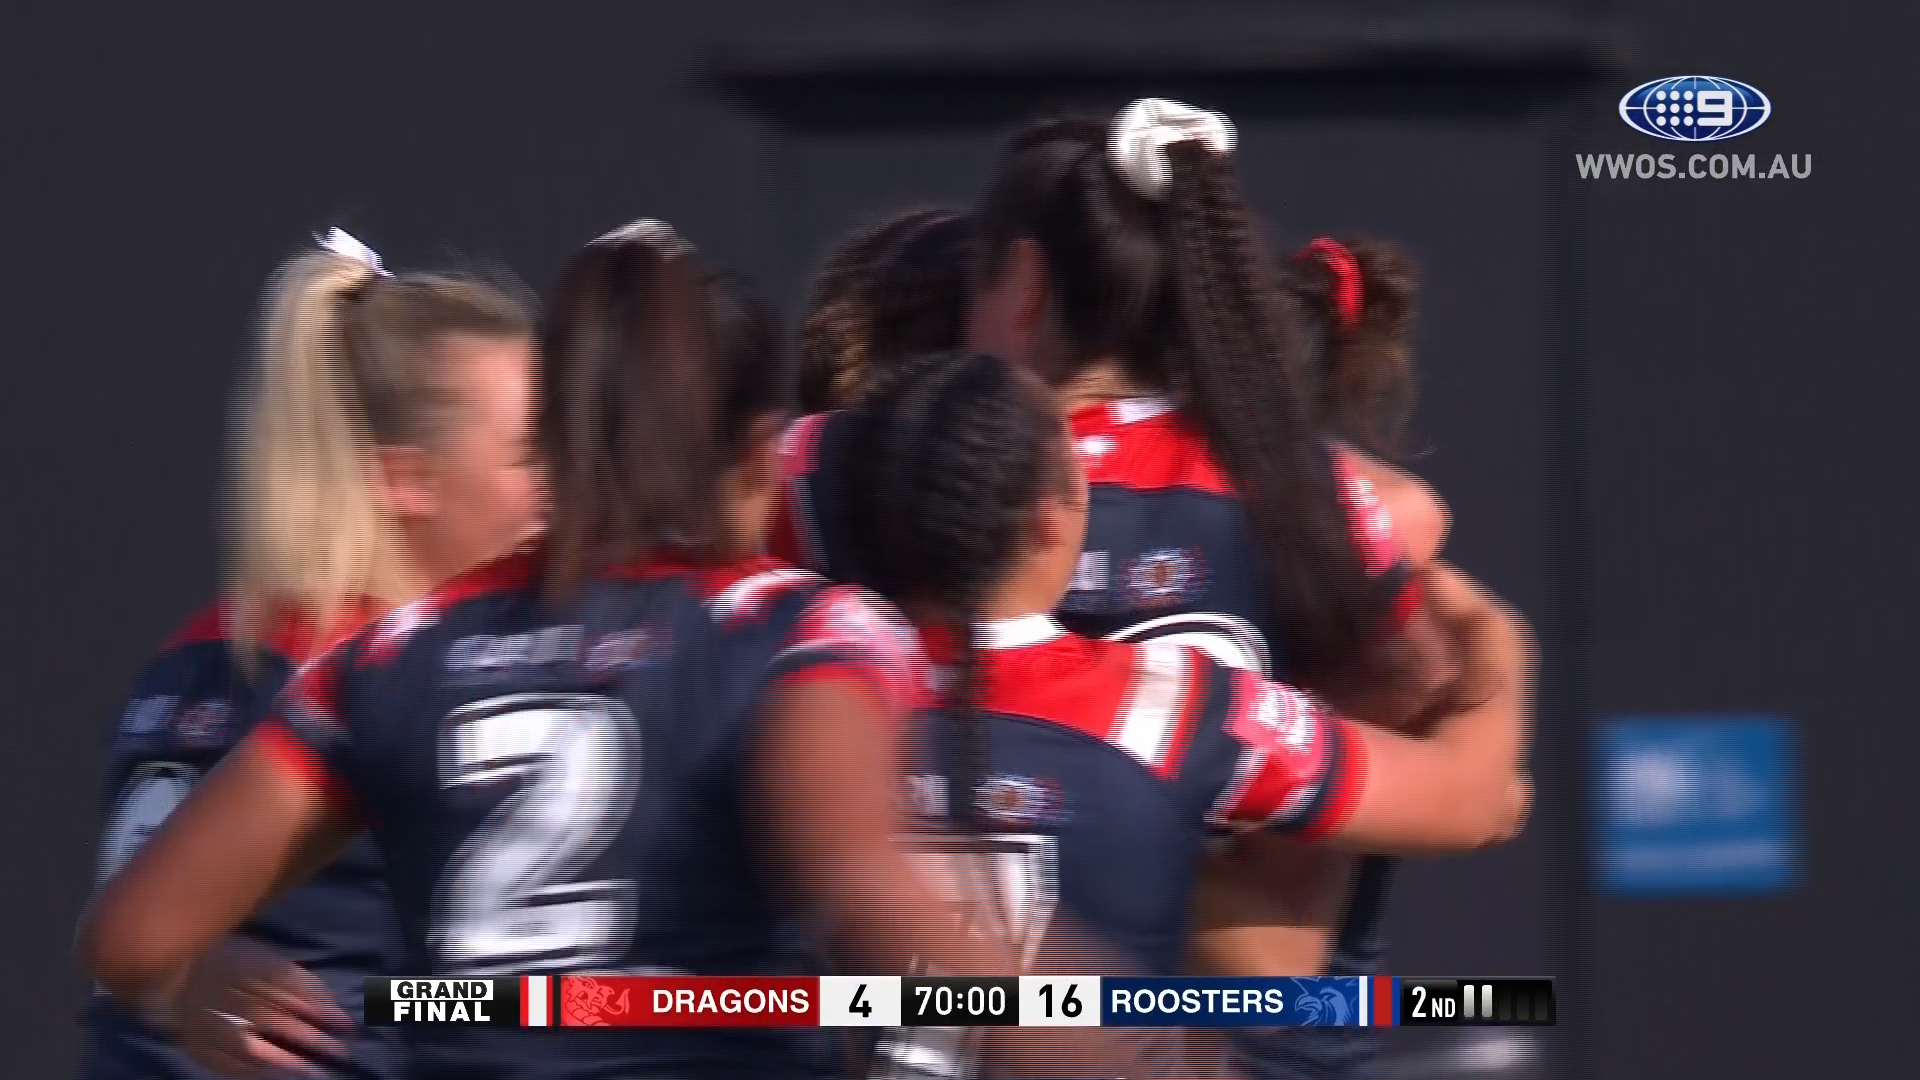 NRLW Highlights: The Roosters come from behind to win the 2021 NRLW premiership